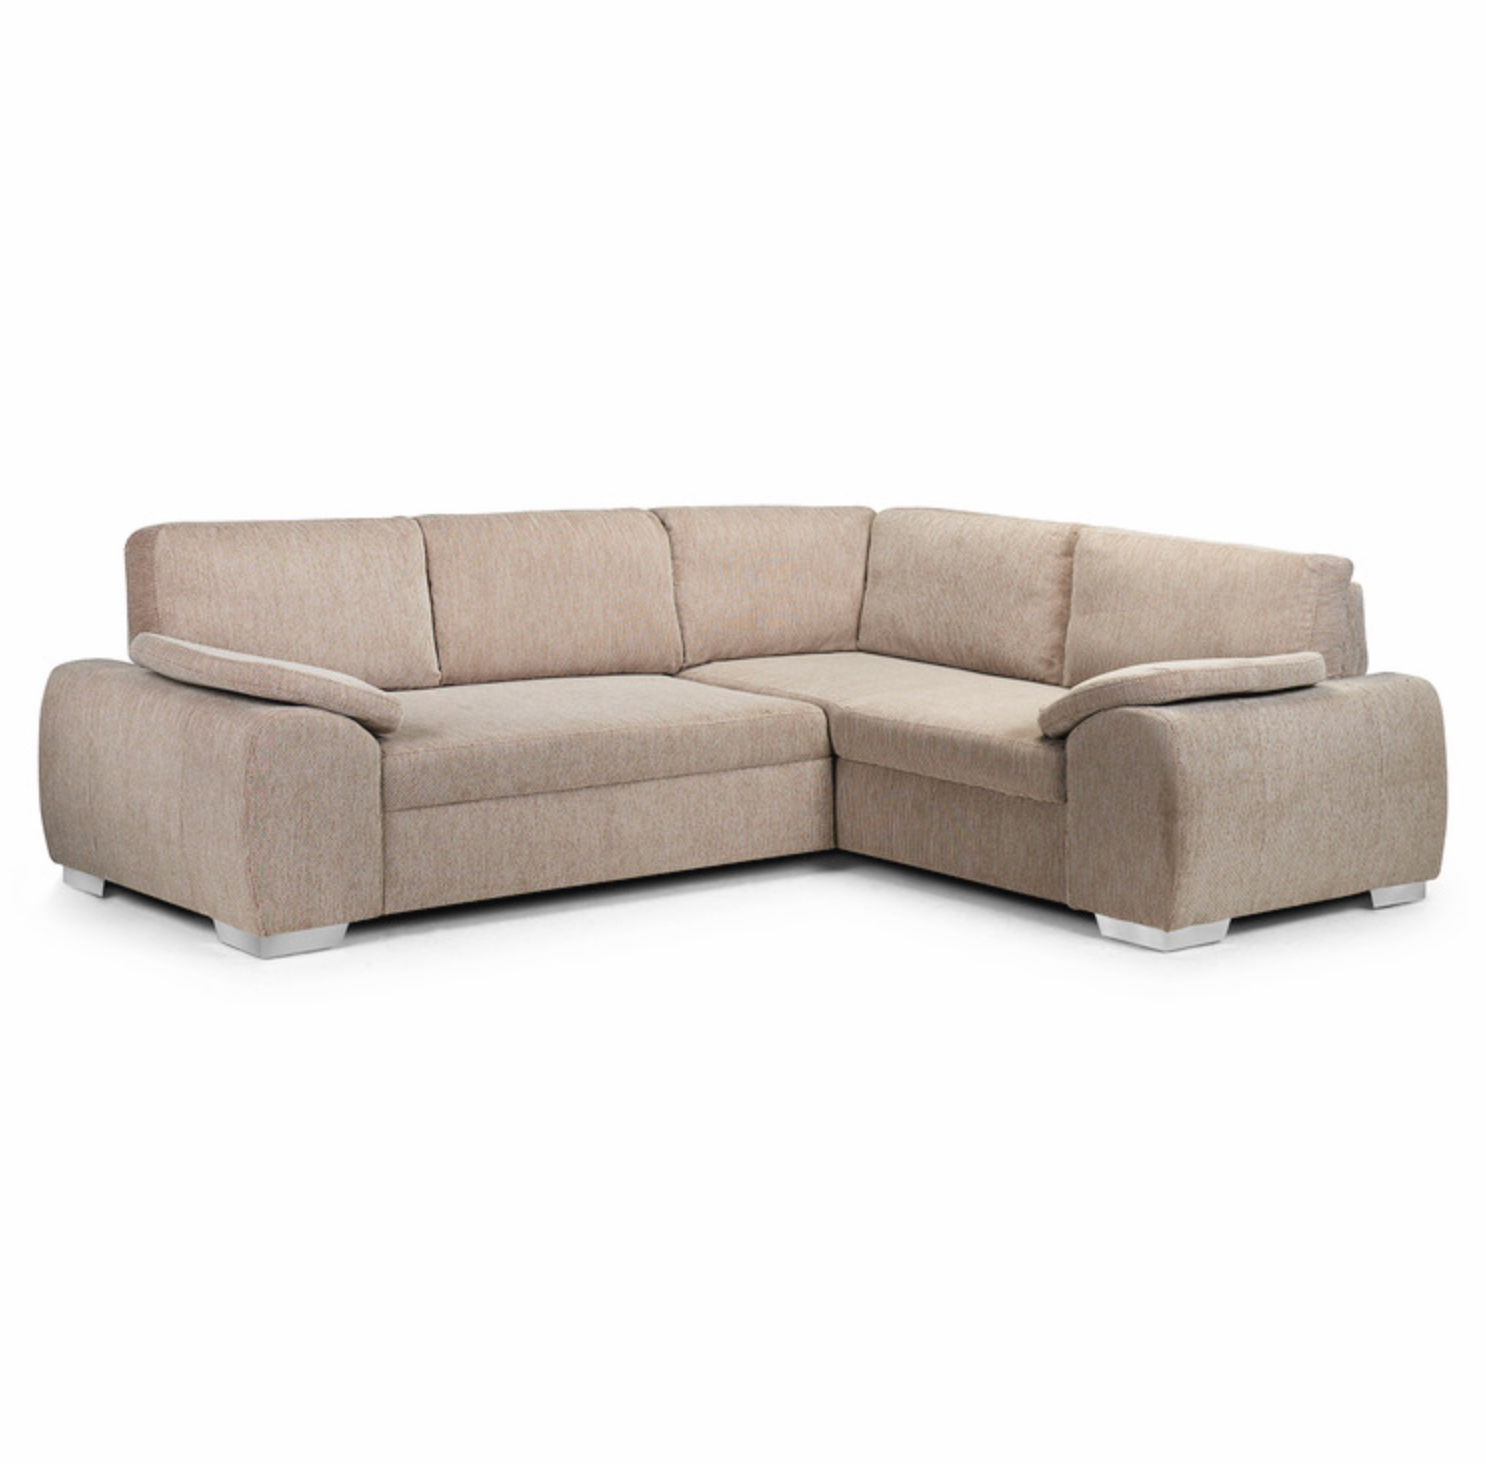 Sussex Right Hand Sofa Bed-Storage Beige Fabric